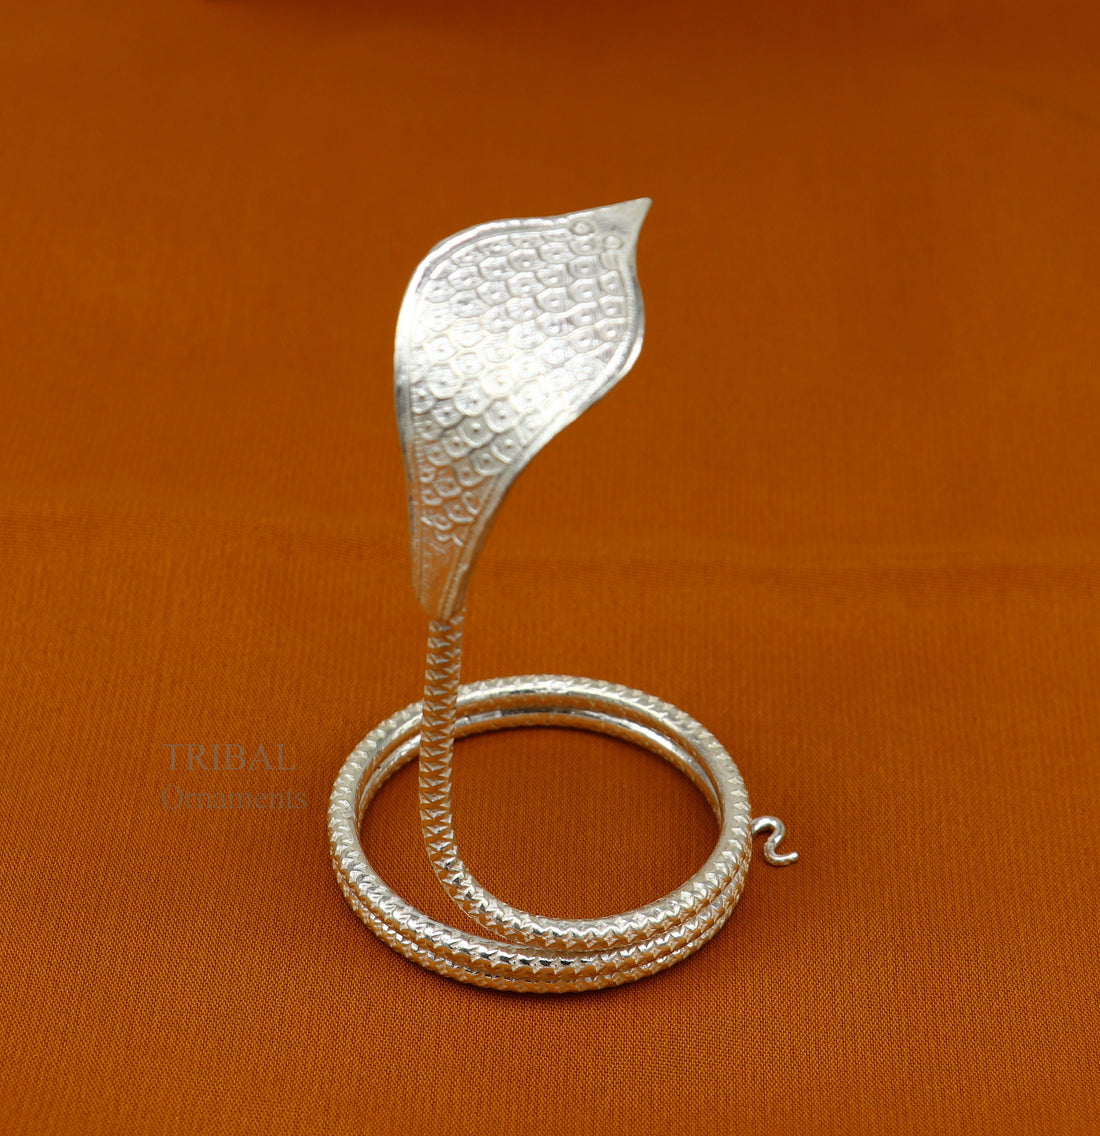 Sterling silver handmade fabulous vintage antique mini snake or shiva snake for puja or worshipping, solid Diwali puja article su672 - TRIBAL ORNAMENTS